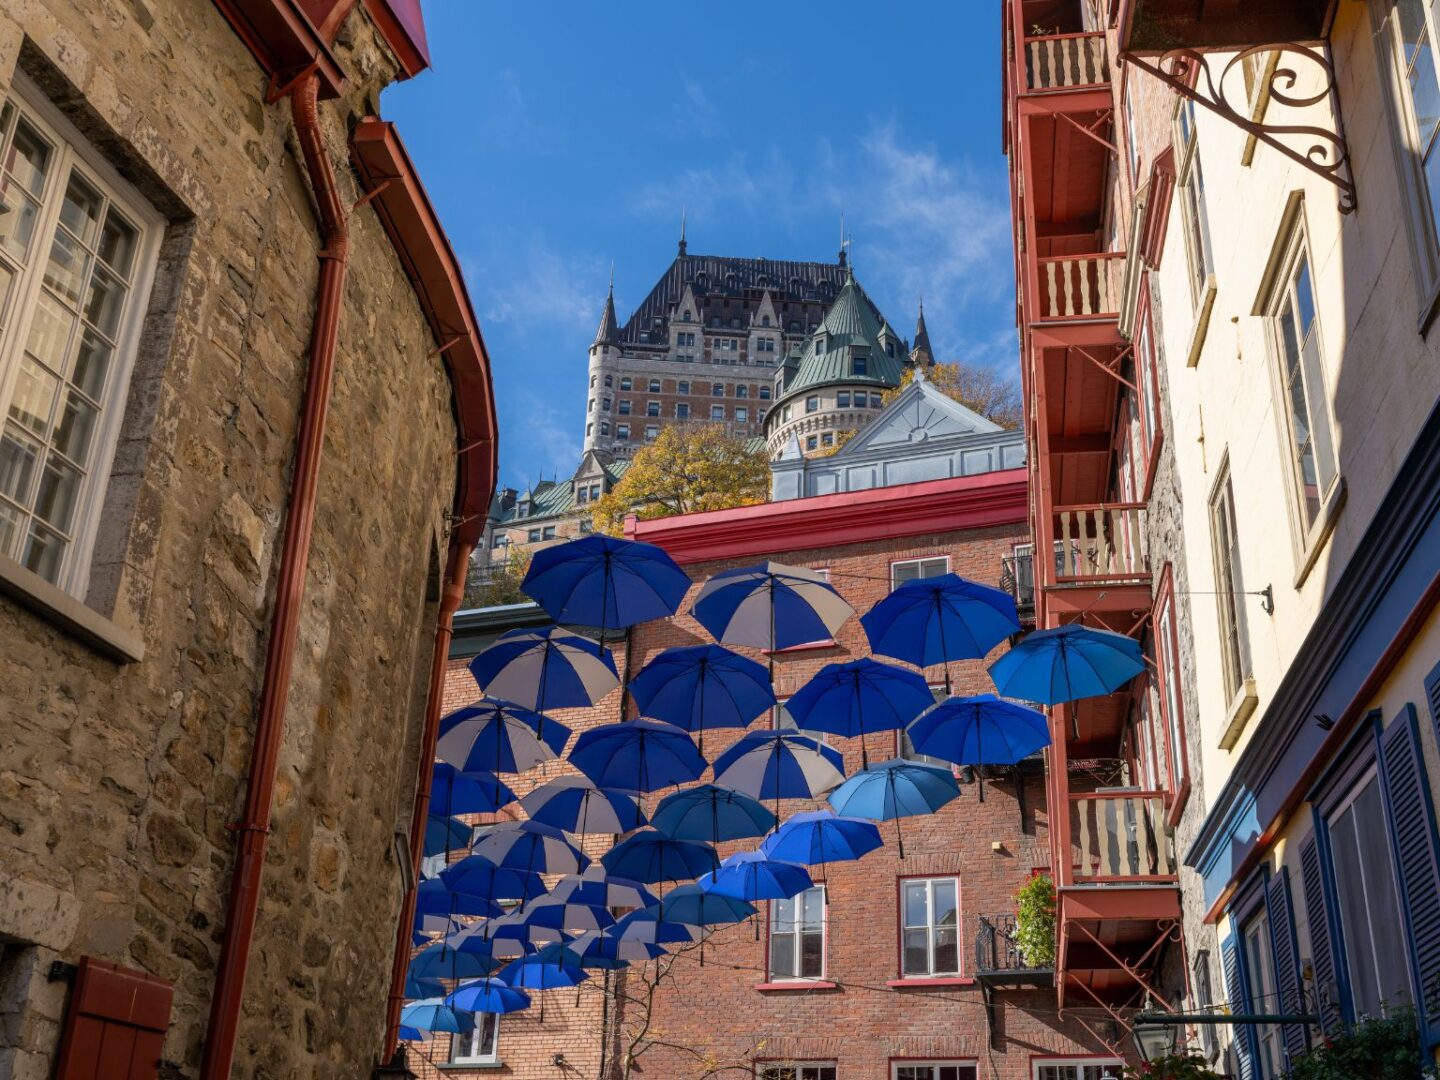 Quebec City feels like a little slice of Europe in Canada, and it's no surprise that most people who visit immediately fall in love with it's old world charm. From the gorgeous old architecture, cute cafes and cobblestoned streets, and beautiful parks, there's more than enough places here to snap your next instagram photo. If you're planning on visiting Quebec City soon you definitely don't want to miss this guide on the most instagrammable places in Quebec City! Pictured here: Rue du Cul-de-Sac